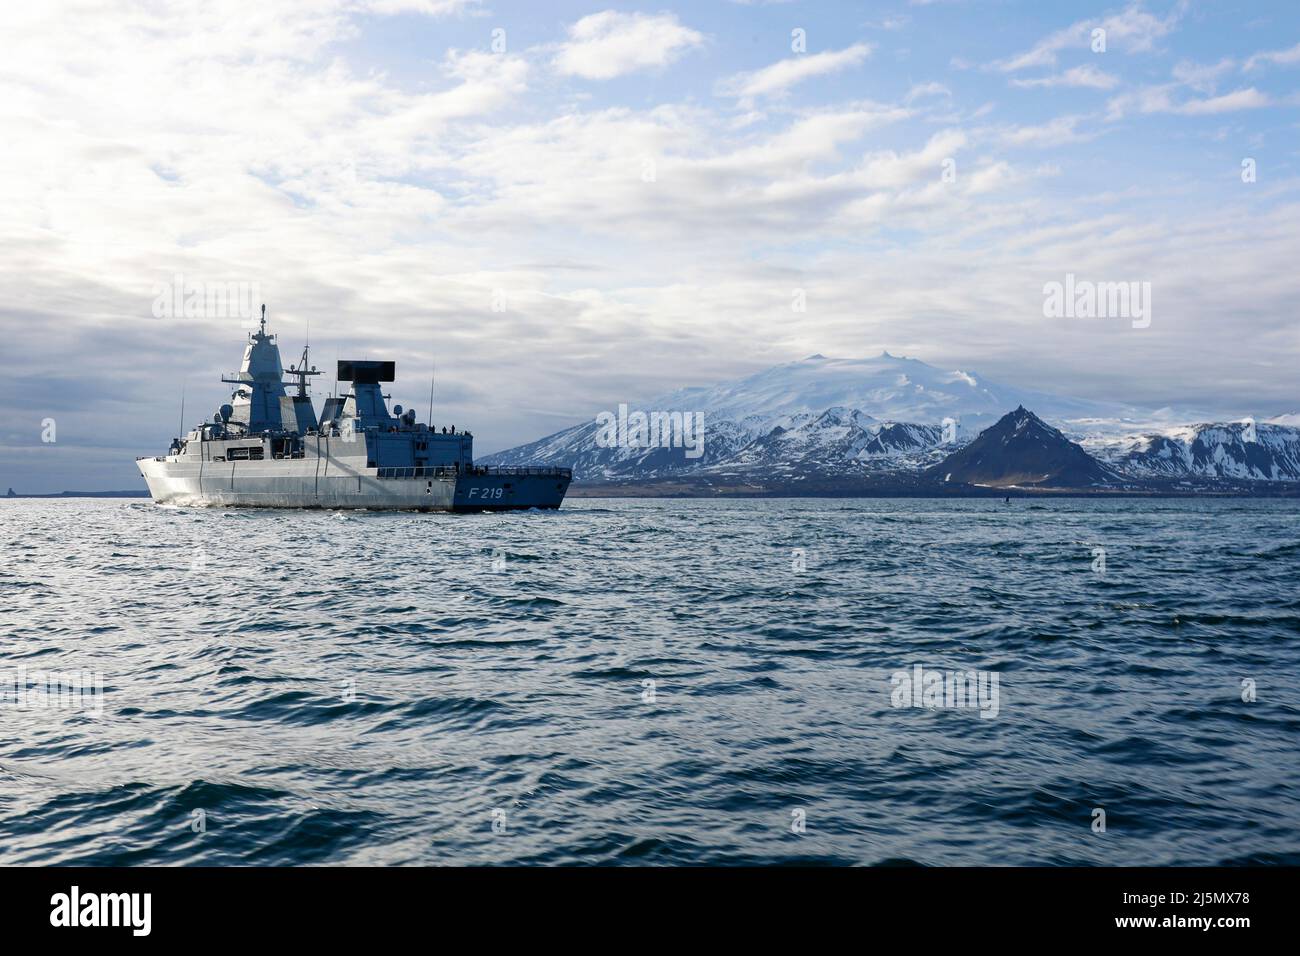 FGS Sachsen, Iceland. 14 April, 2022. The German Navy Sachsen-class air-defense frigate FGS Sachsen transits the North Atlantic Ocean during NATO exercise Northern Viking 22, April 14, 2022 in Iceland.  Credit: German Navy/Planetpix/Alamy Live News Stock Photo